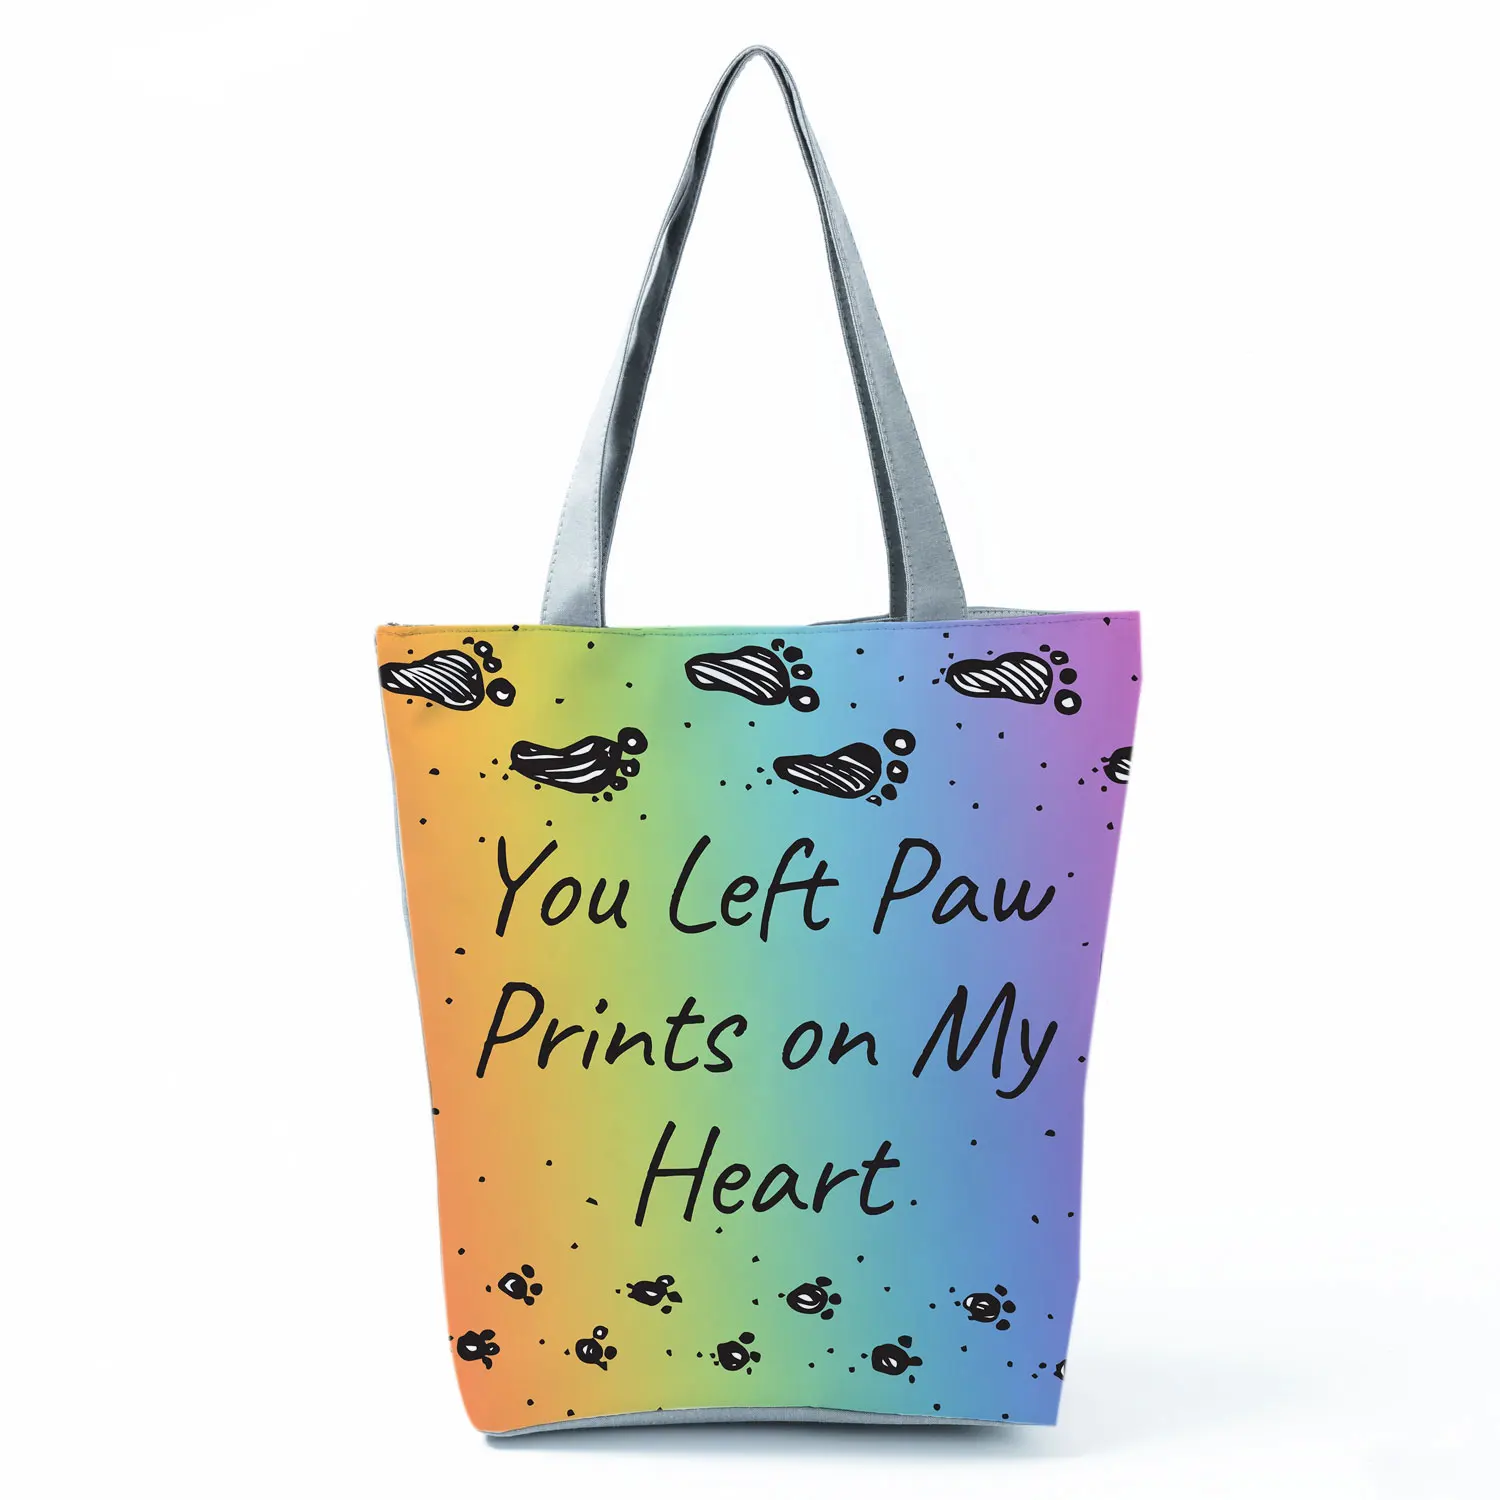 2022 New Fashion Women Dogs Paws Tote Love Dogs Funny Casual Handbags Kawaii Female Shoulder Bag Eco High Capacity Shopping Bags 